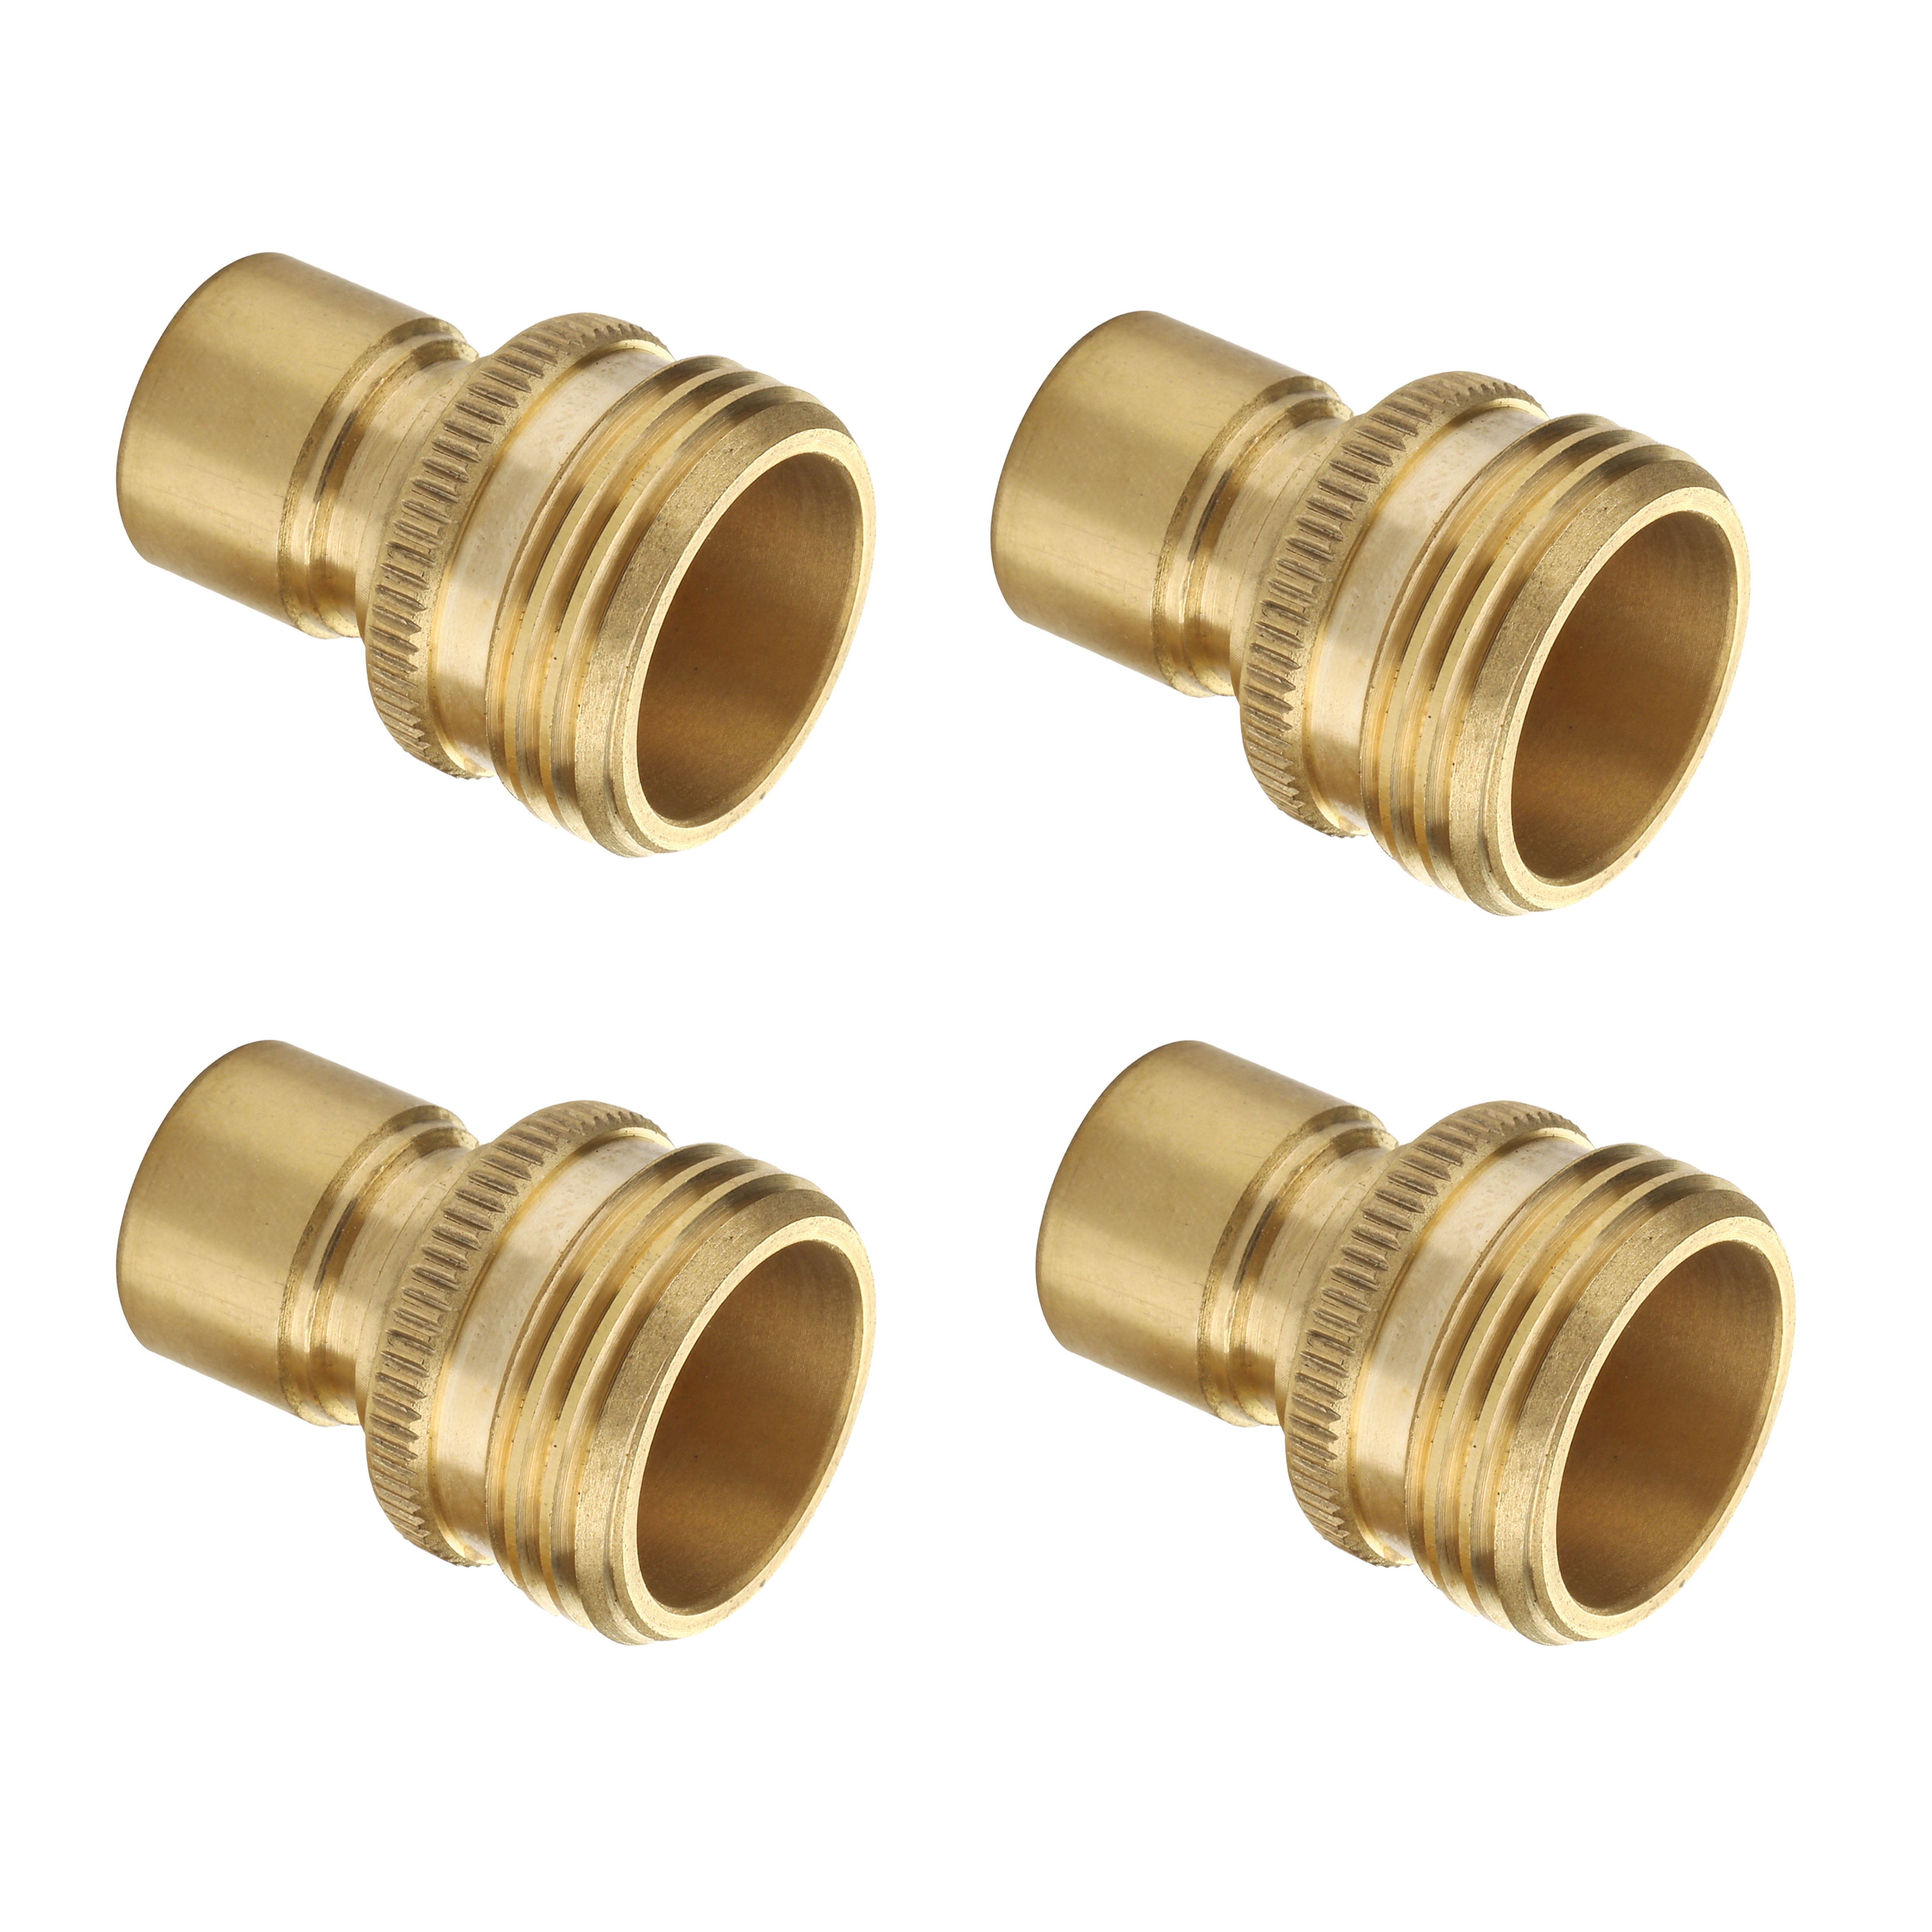 M MINGLE Garden Hose Quick Connect Fittings Quick Con 3/4 Inch GHT Solid Brass 